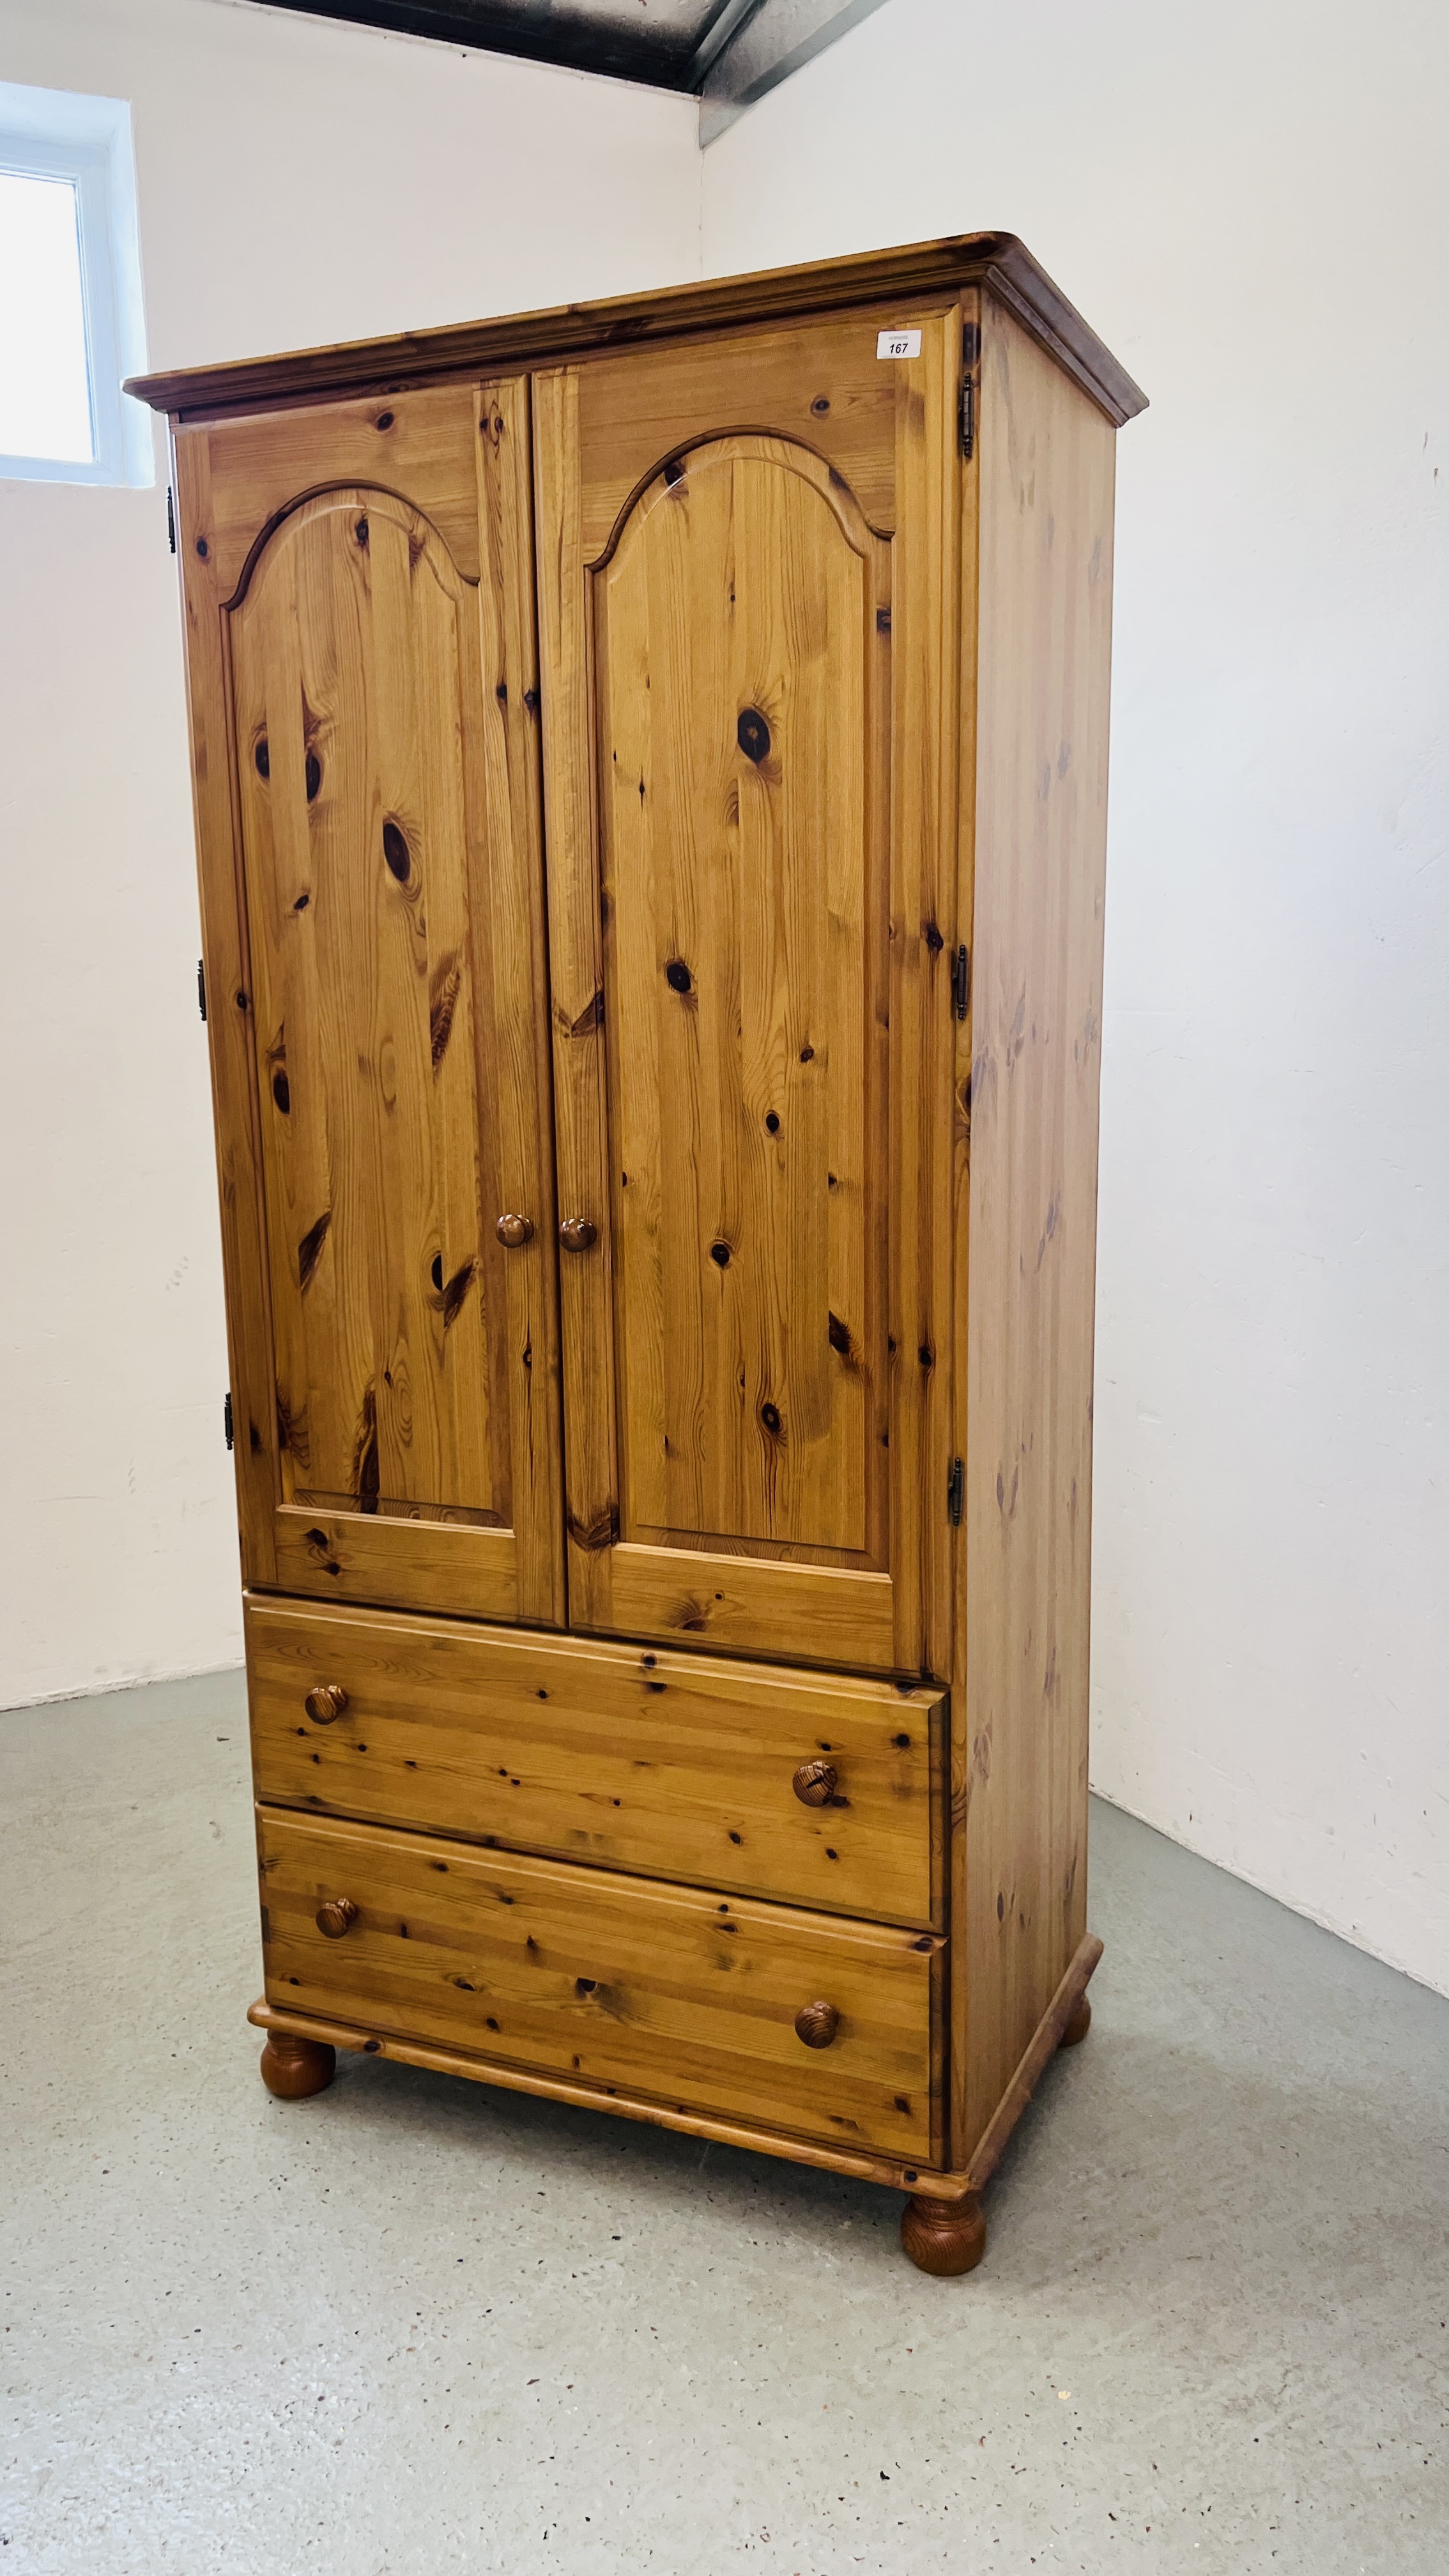 A GOOD QUALITY HONEY PINE TWO DOOR WARDROBE WITH TWO DRAWER BASE WIDTH 93CM. DEPTH 56CM.